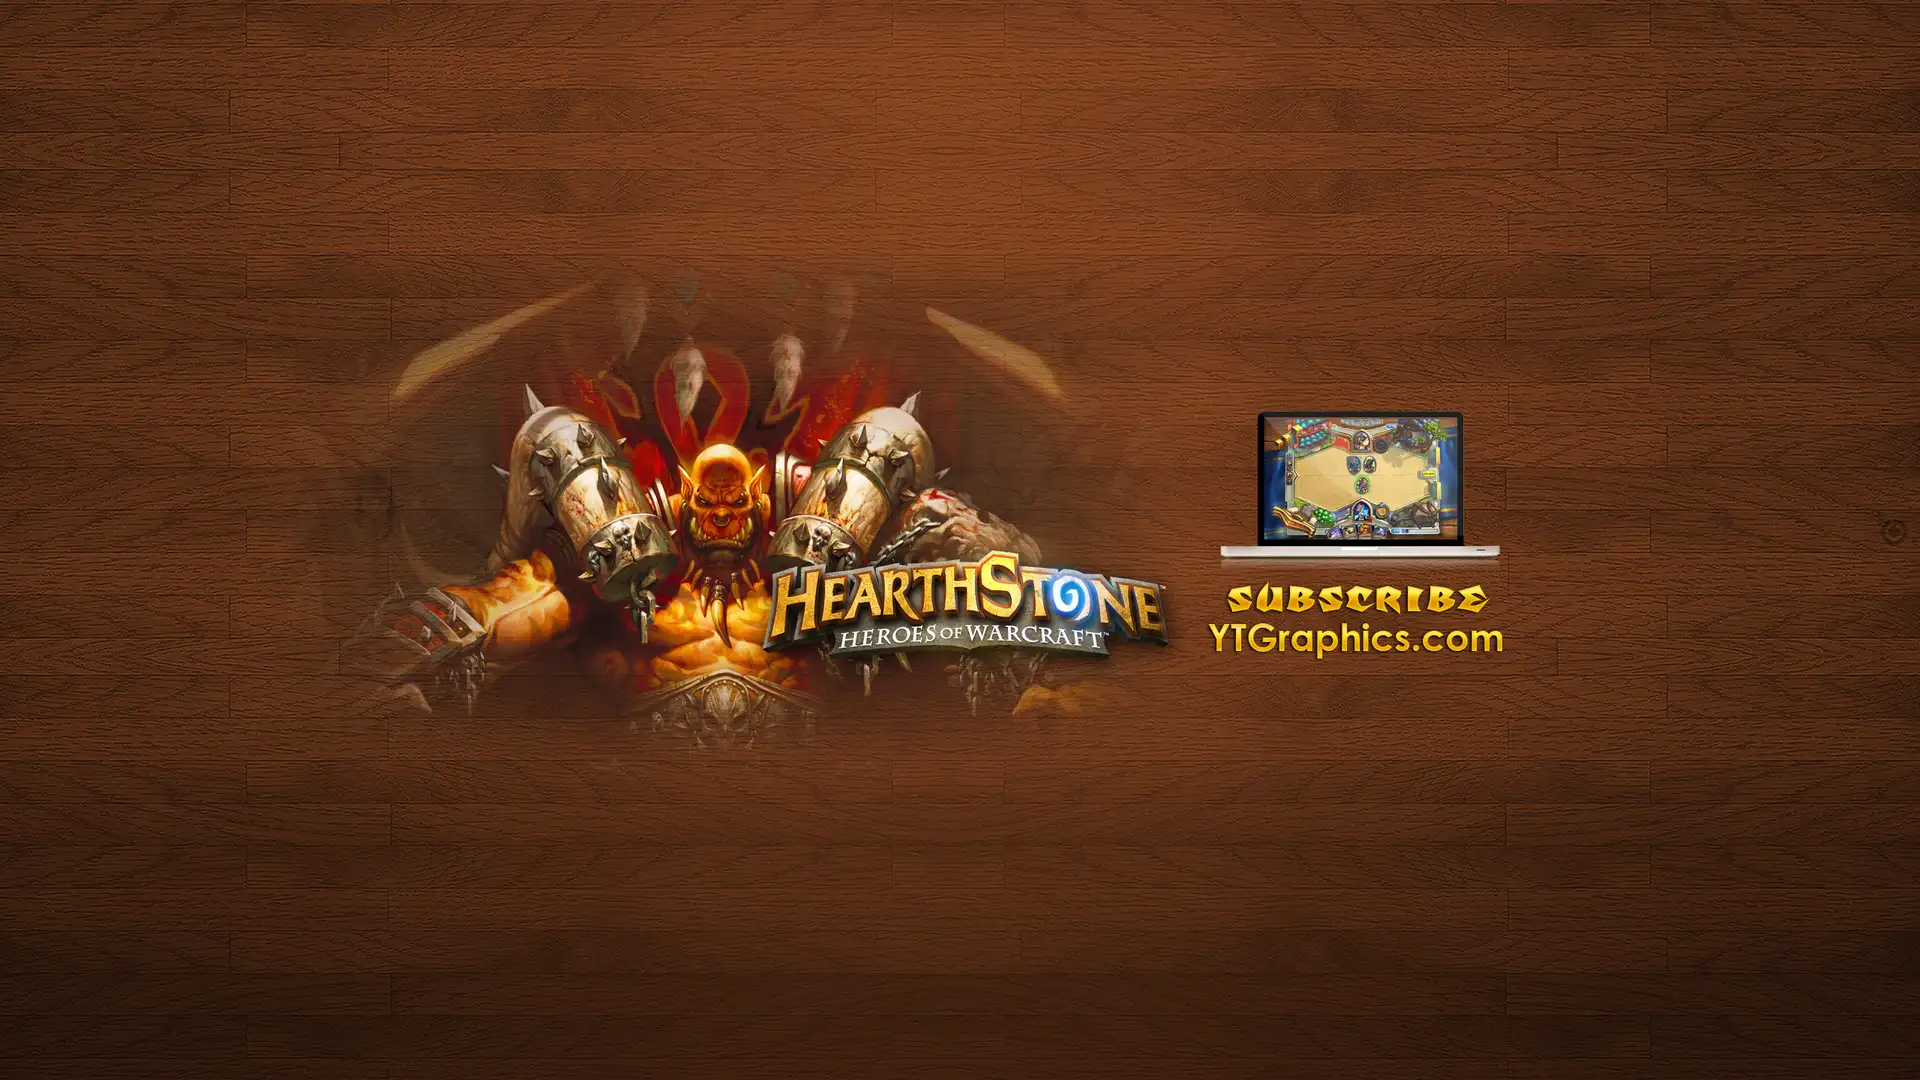 HearthStone: Heroes of Warcraft Banner